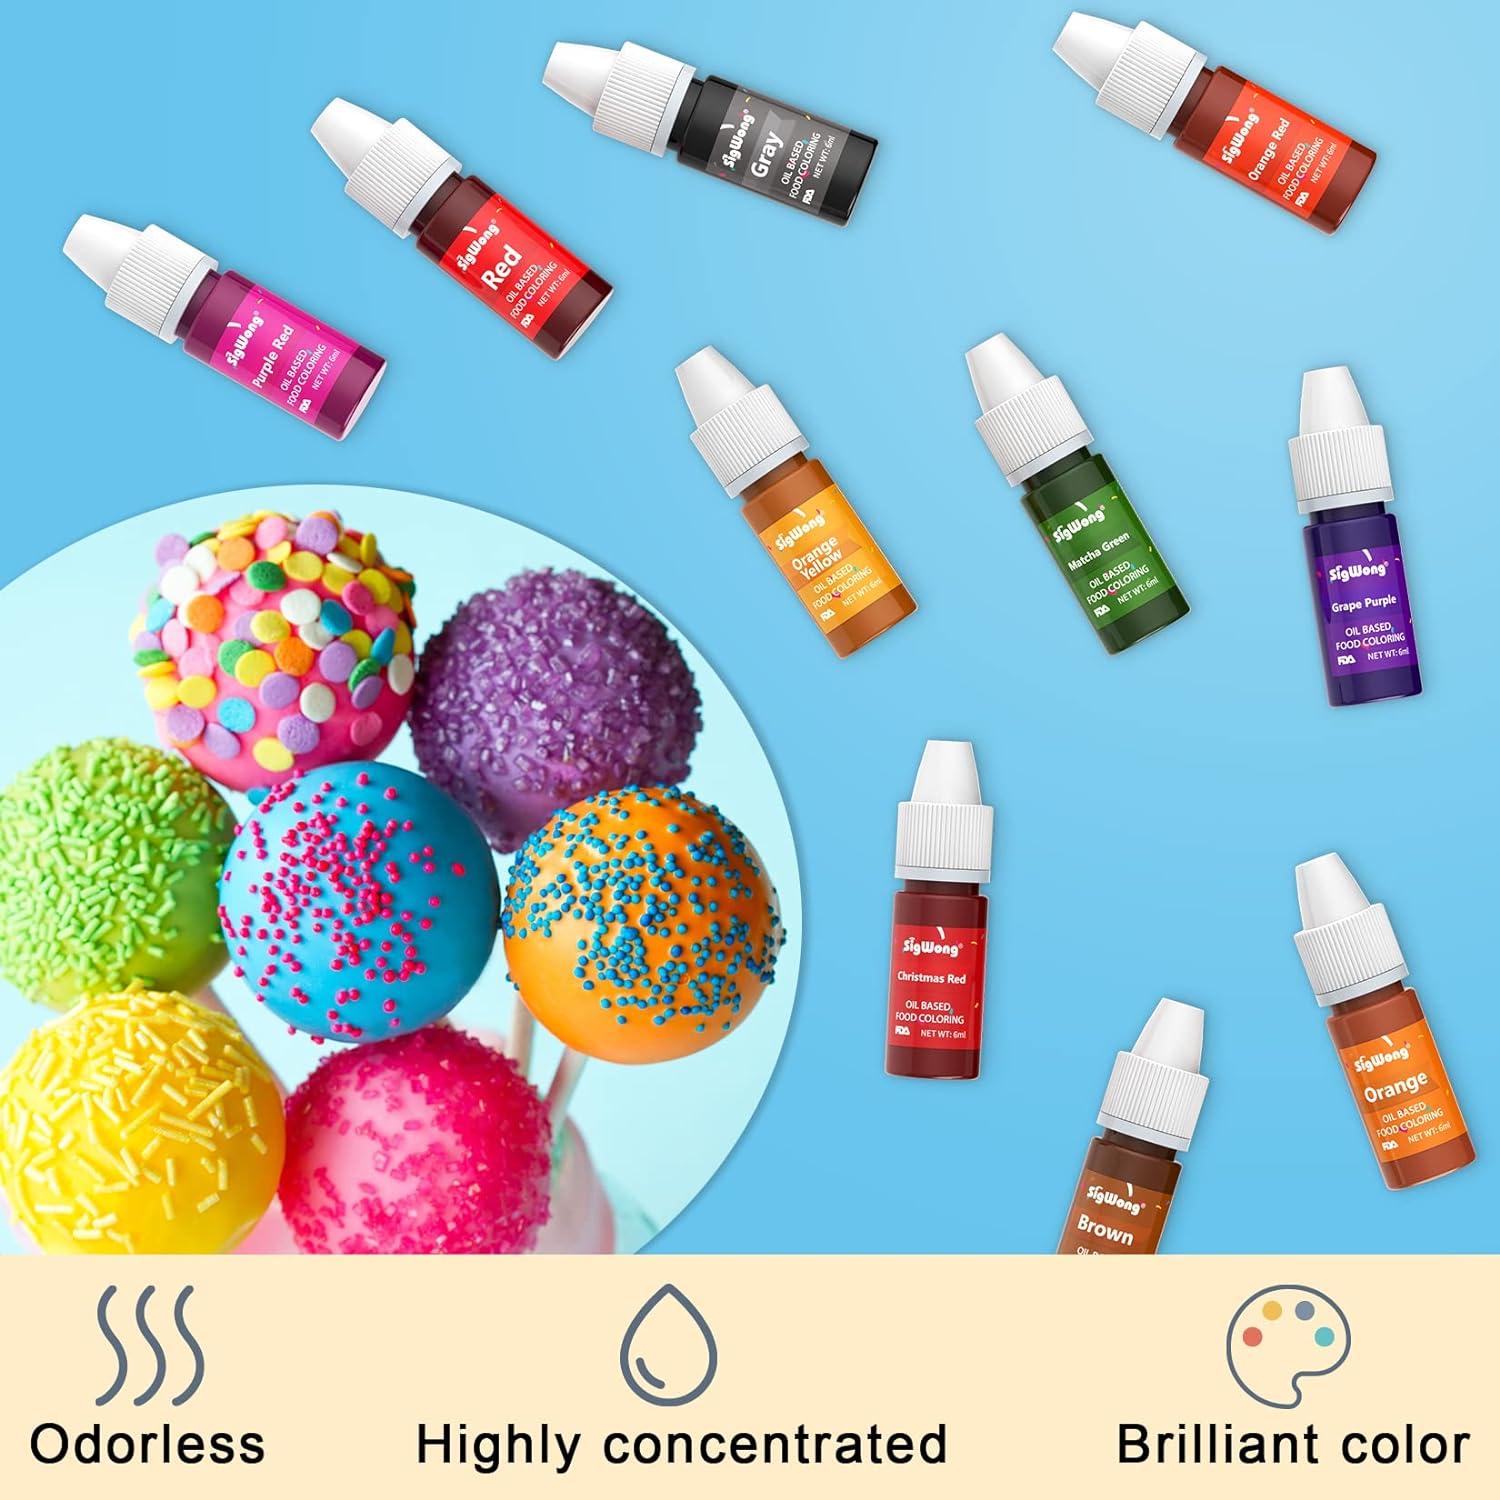  Food Coloring Liquid - 16 Colors Vibrant Food Coloring Set,  Upgraded Tasteless Food Grade Food Dye for Cake Decorating, Baking,  Cookies, Icing, Slime, Easter Egg, Fondant and DIY Crafts 